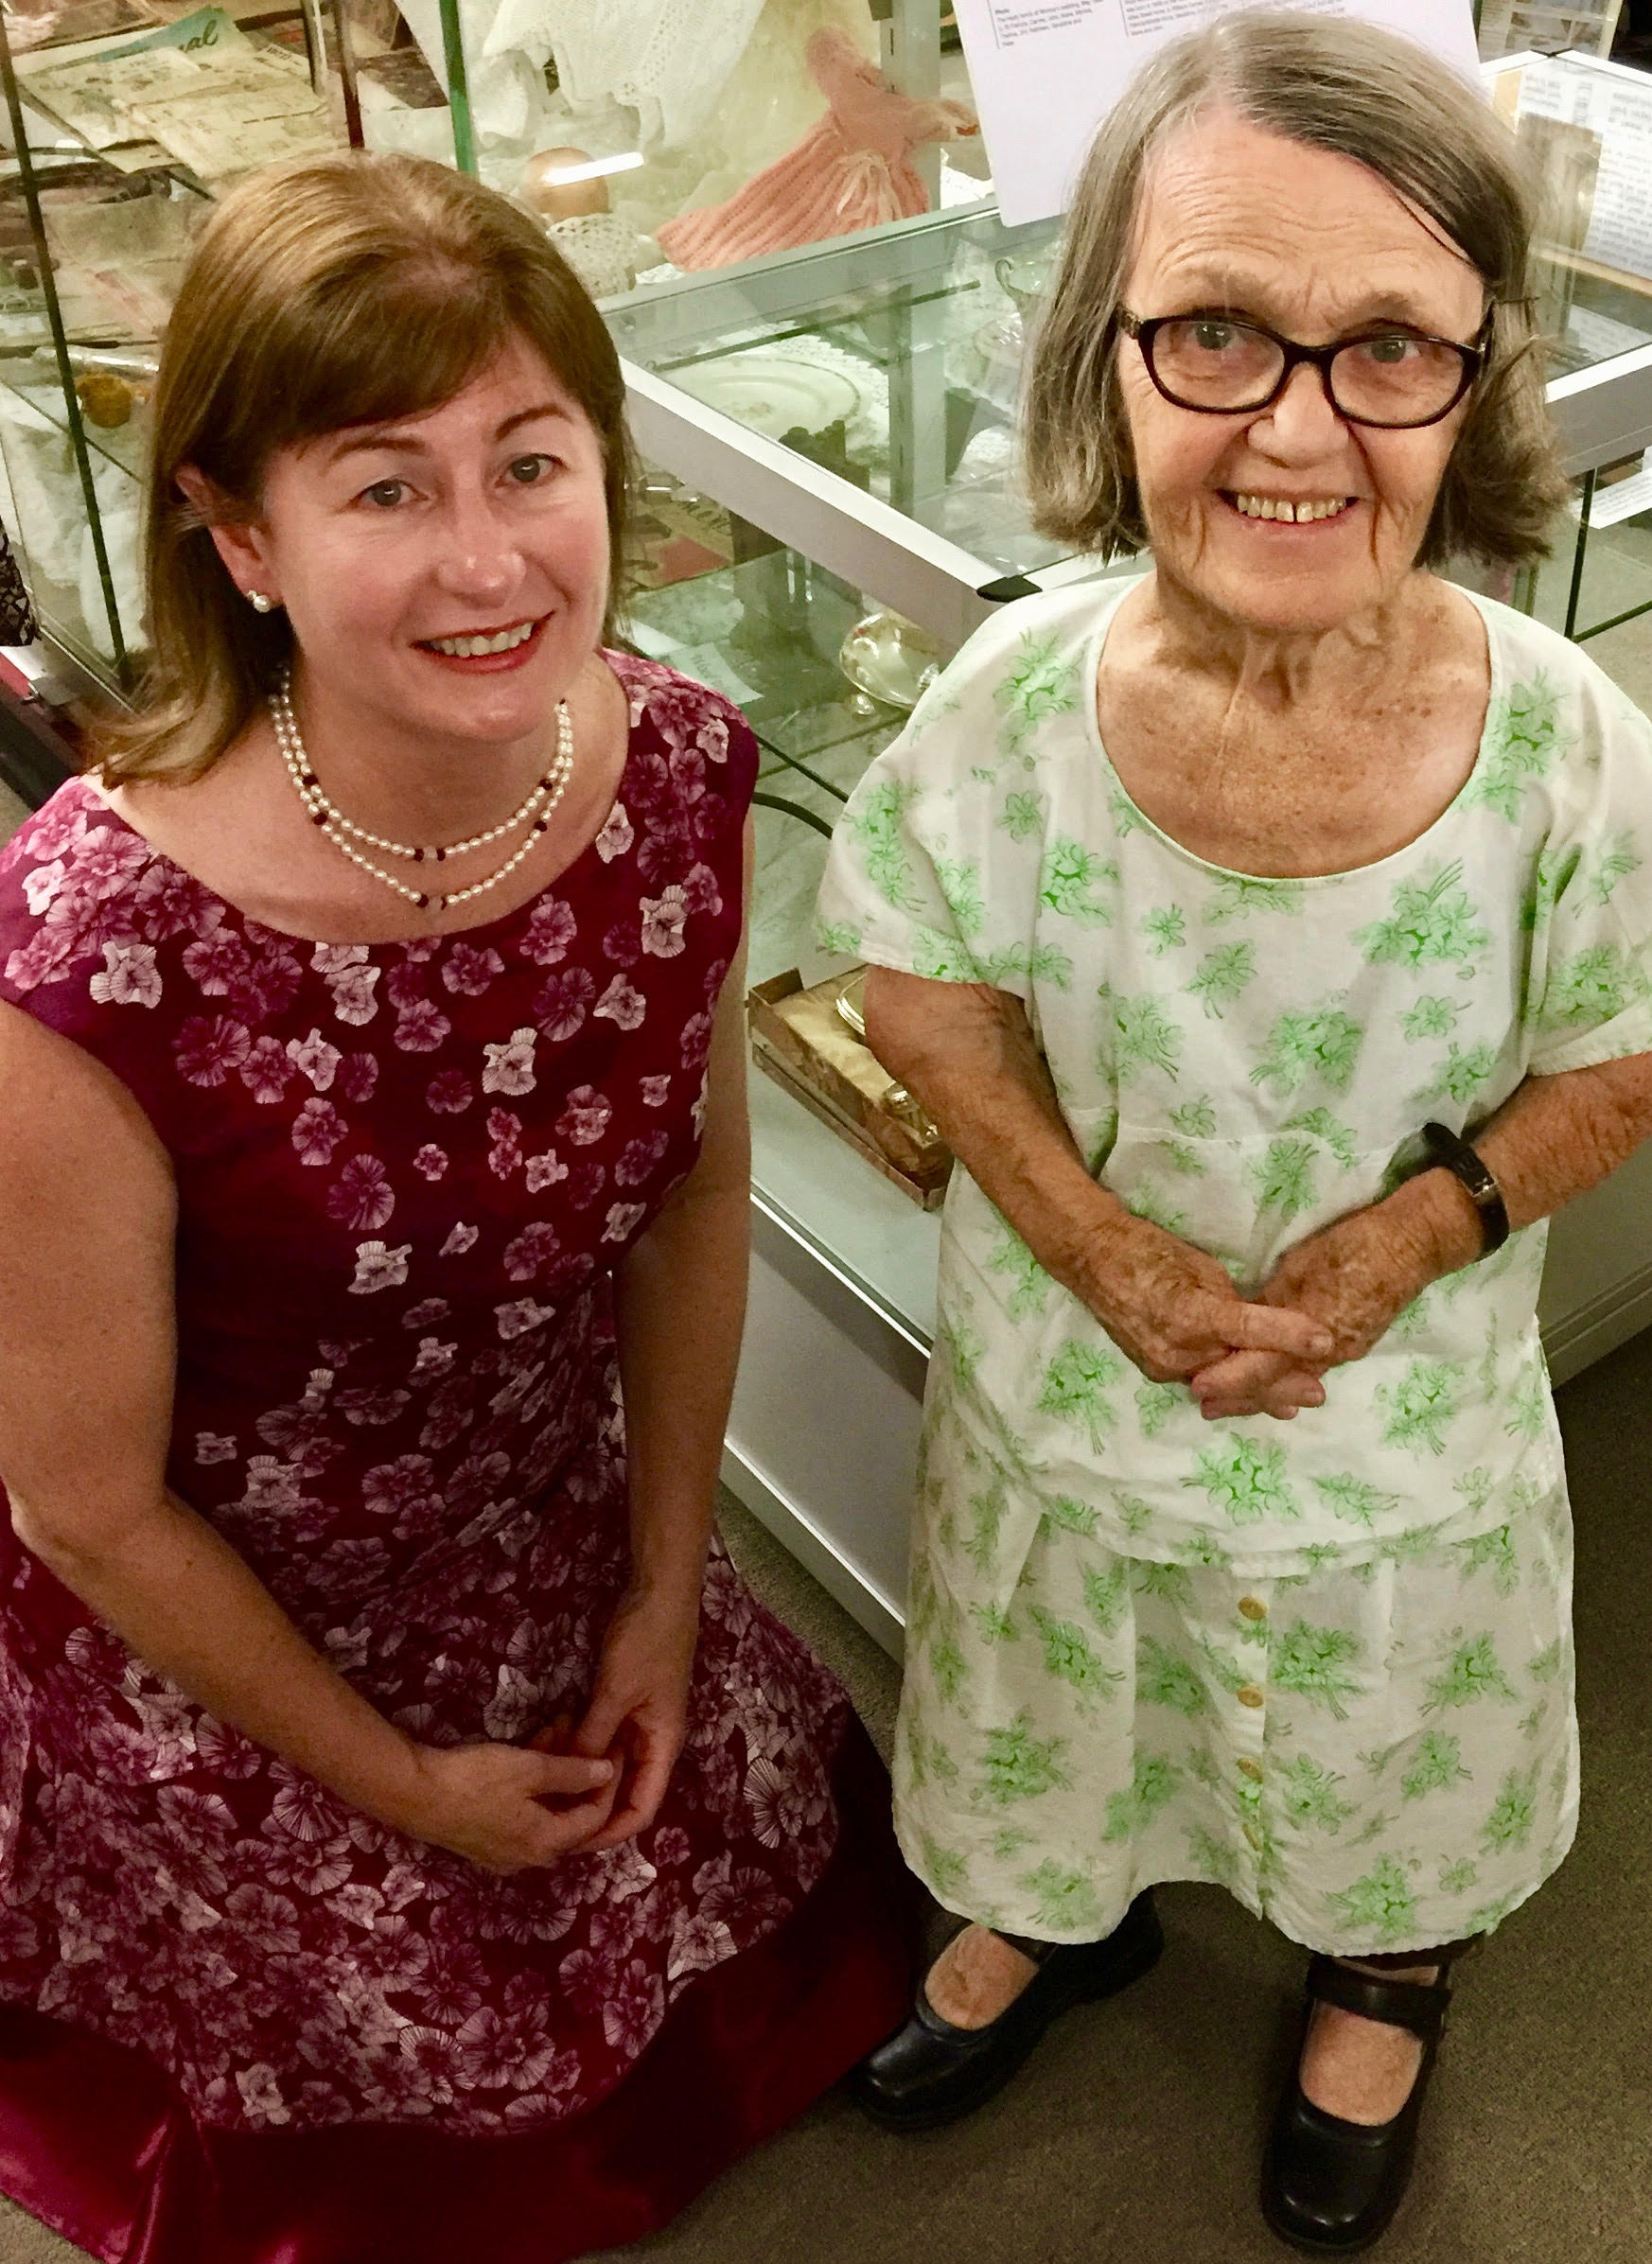 Carmel attends a Passage to Pusan exhibition at the Sandgate & District Historical Society & Museum with her author niece Louise Evans.